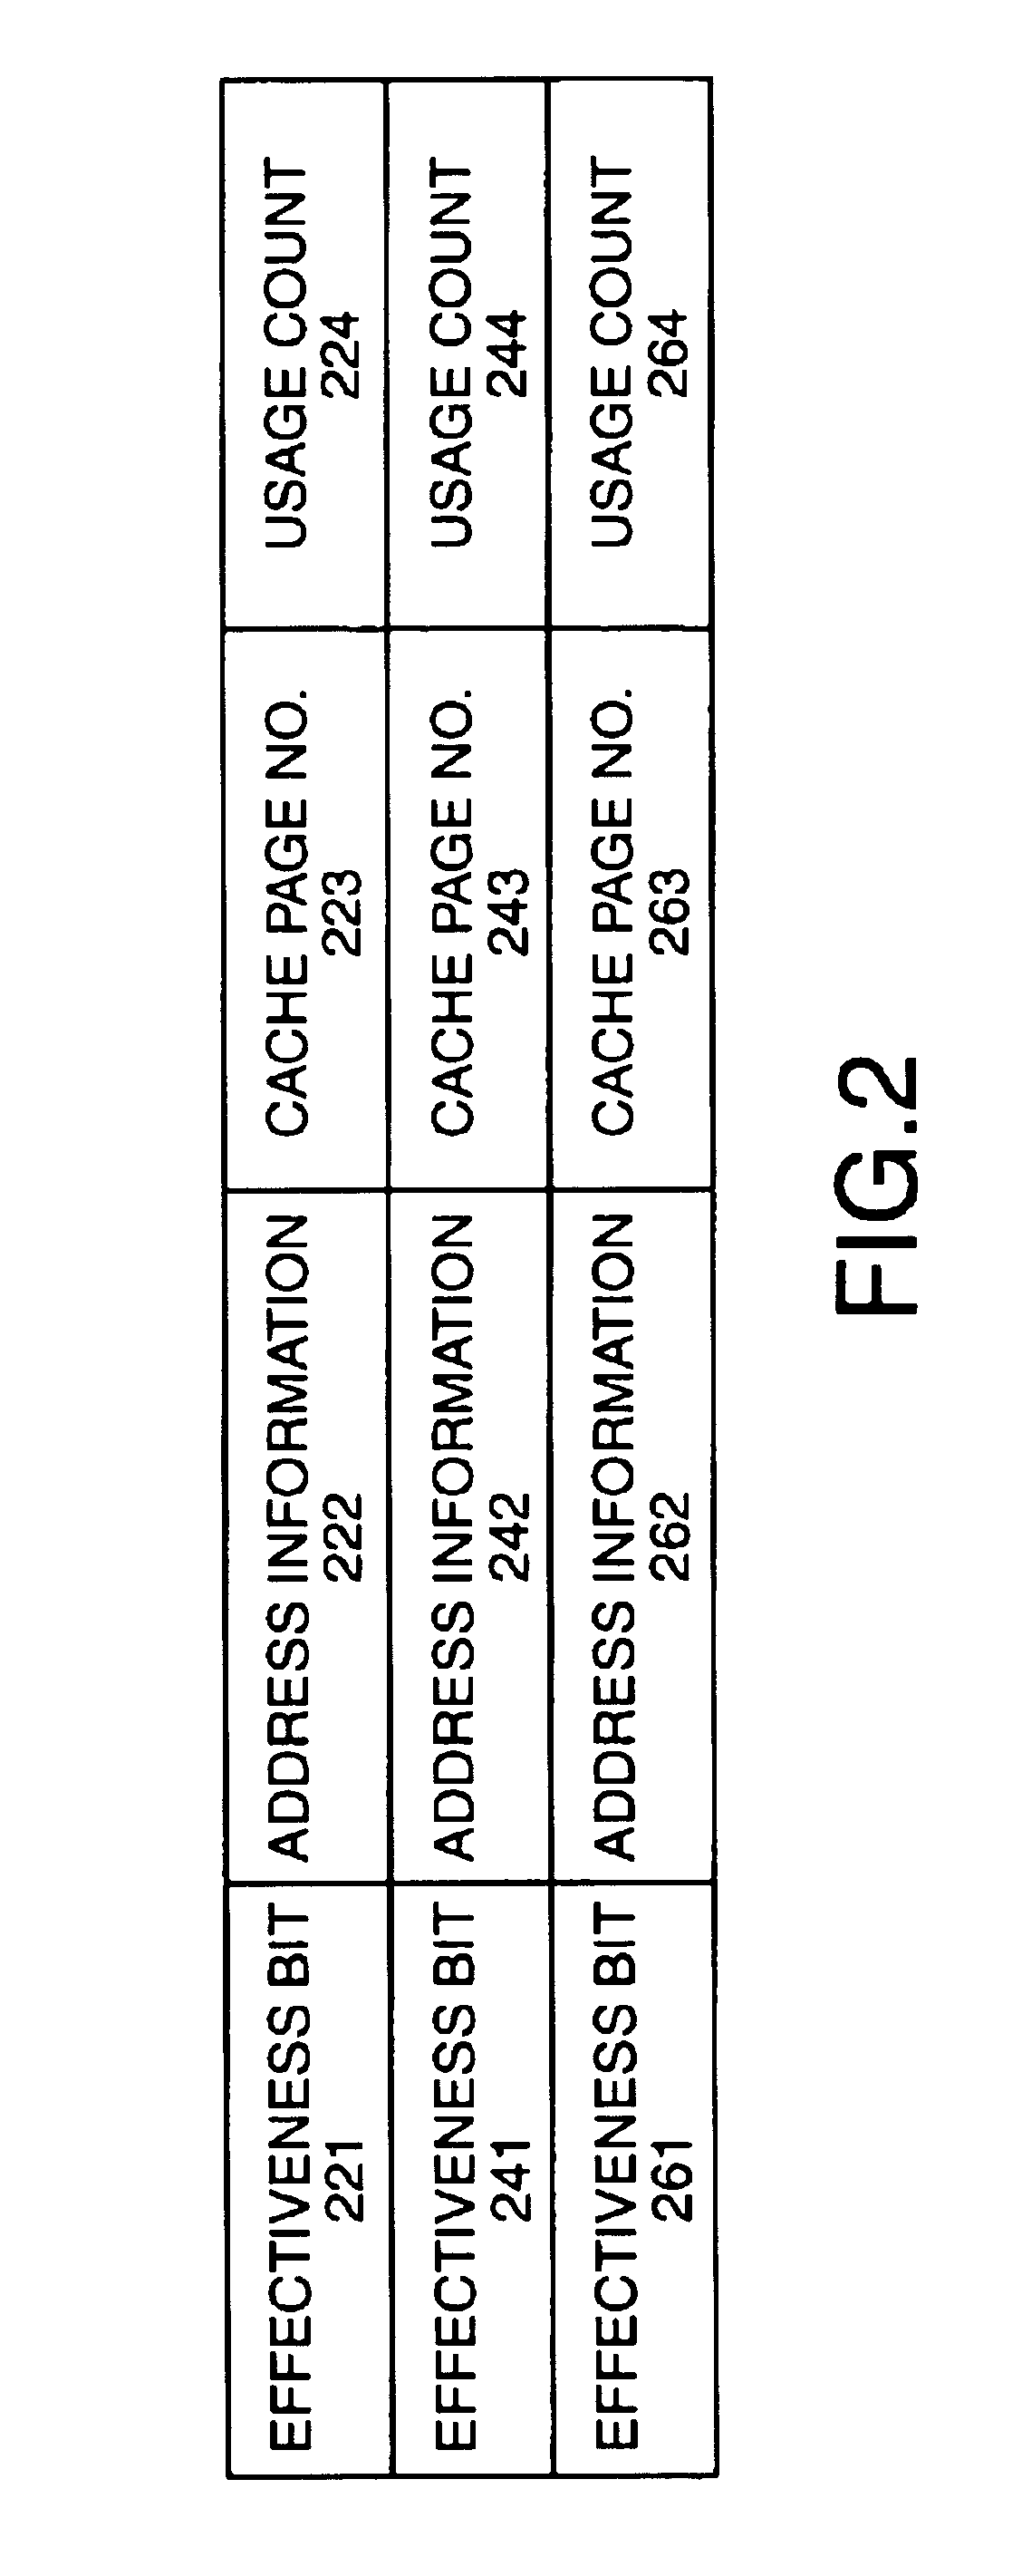 Disk cache control for servicing a plurality of hosts